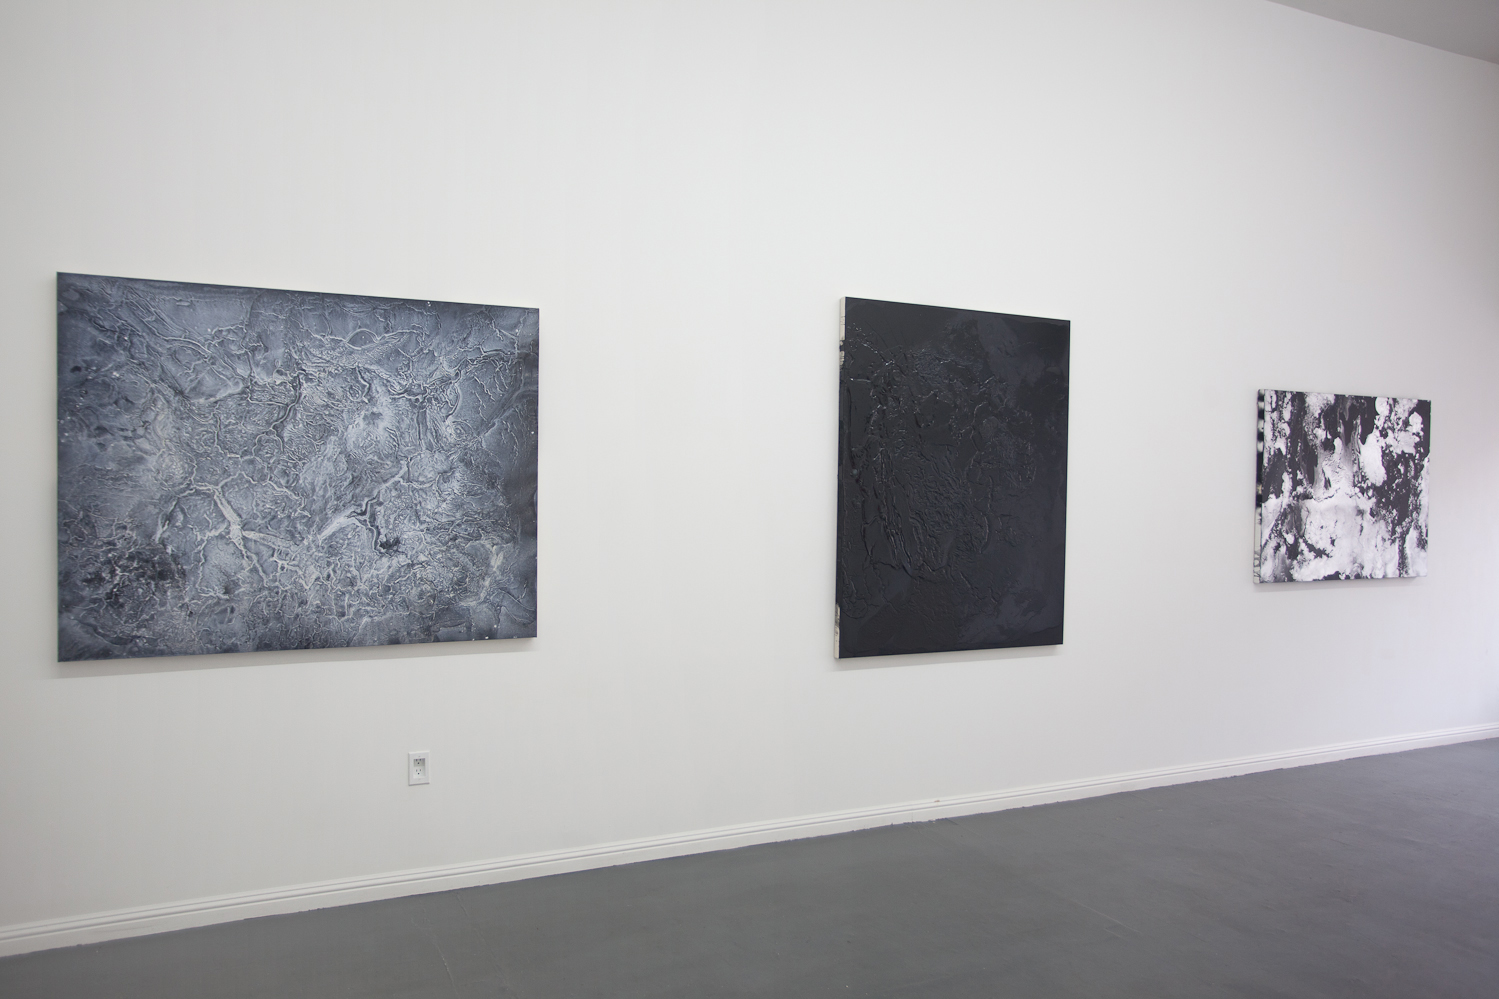   Purr Valley,  Installation view, CULT, Aimee Friberg Exhibitions, 2014 